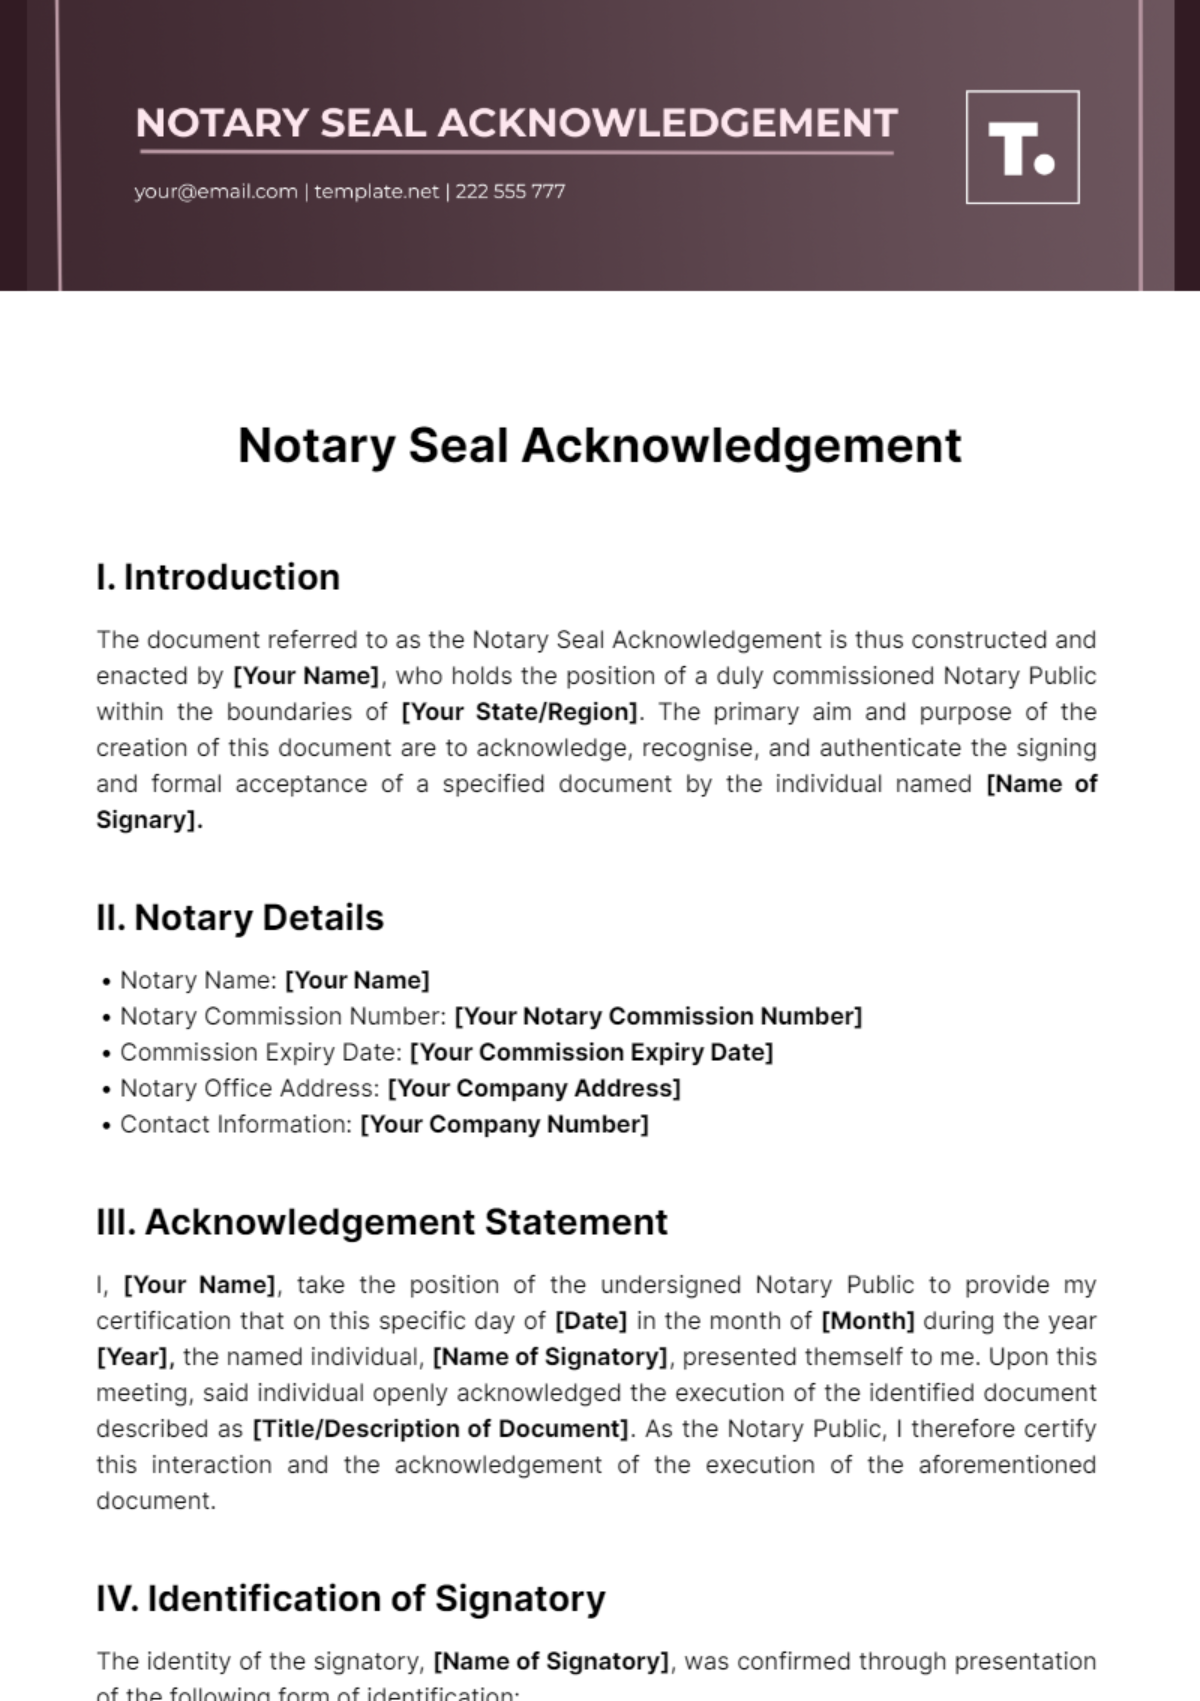 Free Notary Seal Acknowledgement Template